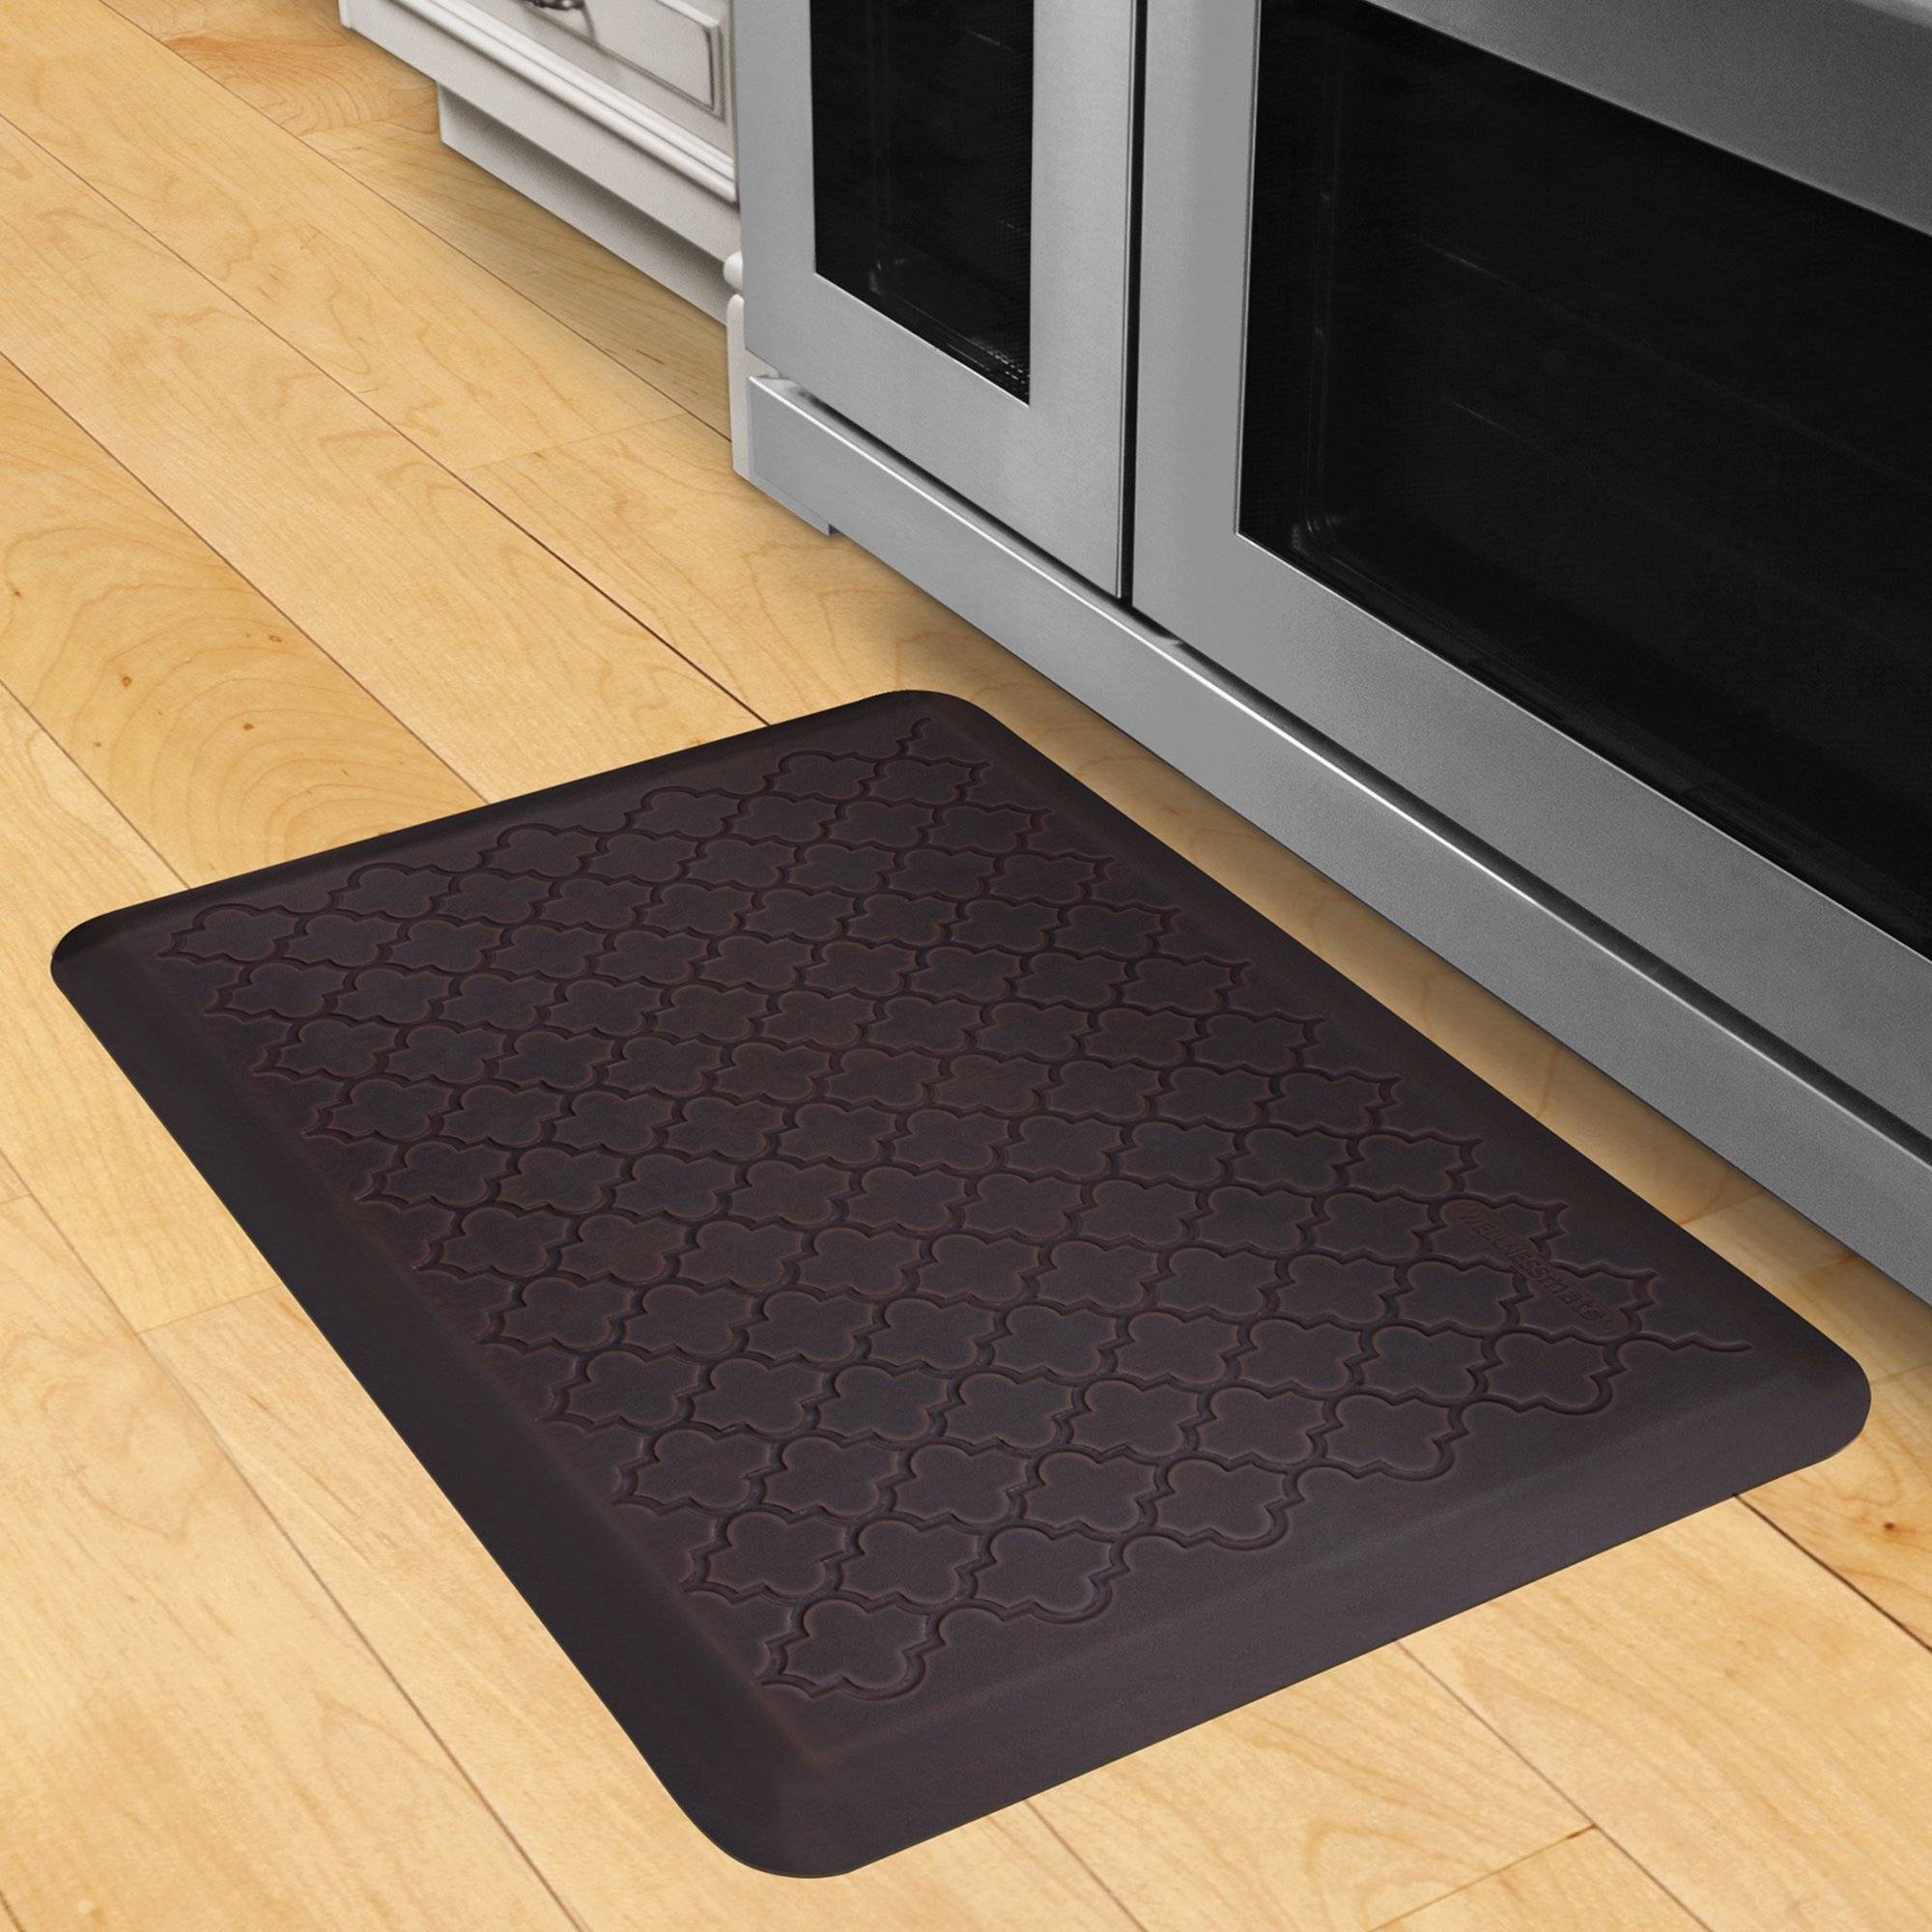 Wellnessmats Trellis Estates Shades of Blue ET32WMRBBUR,Navy Pier A recyclable kitchen rug. Anti-microbial floor mat that gives comfort to your feet.